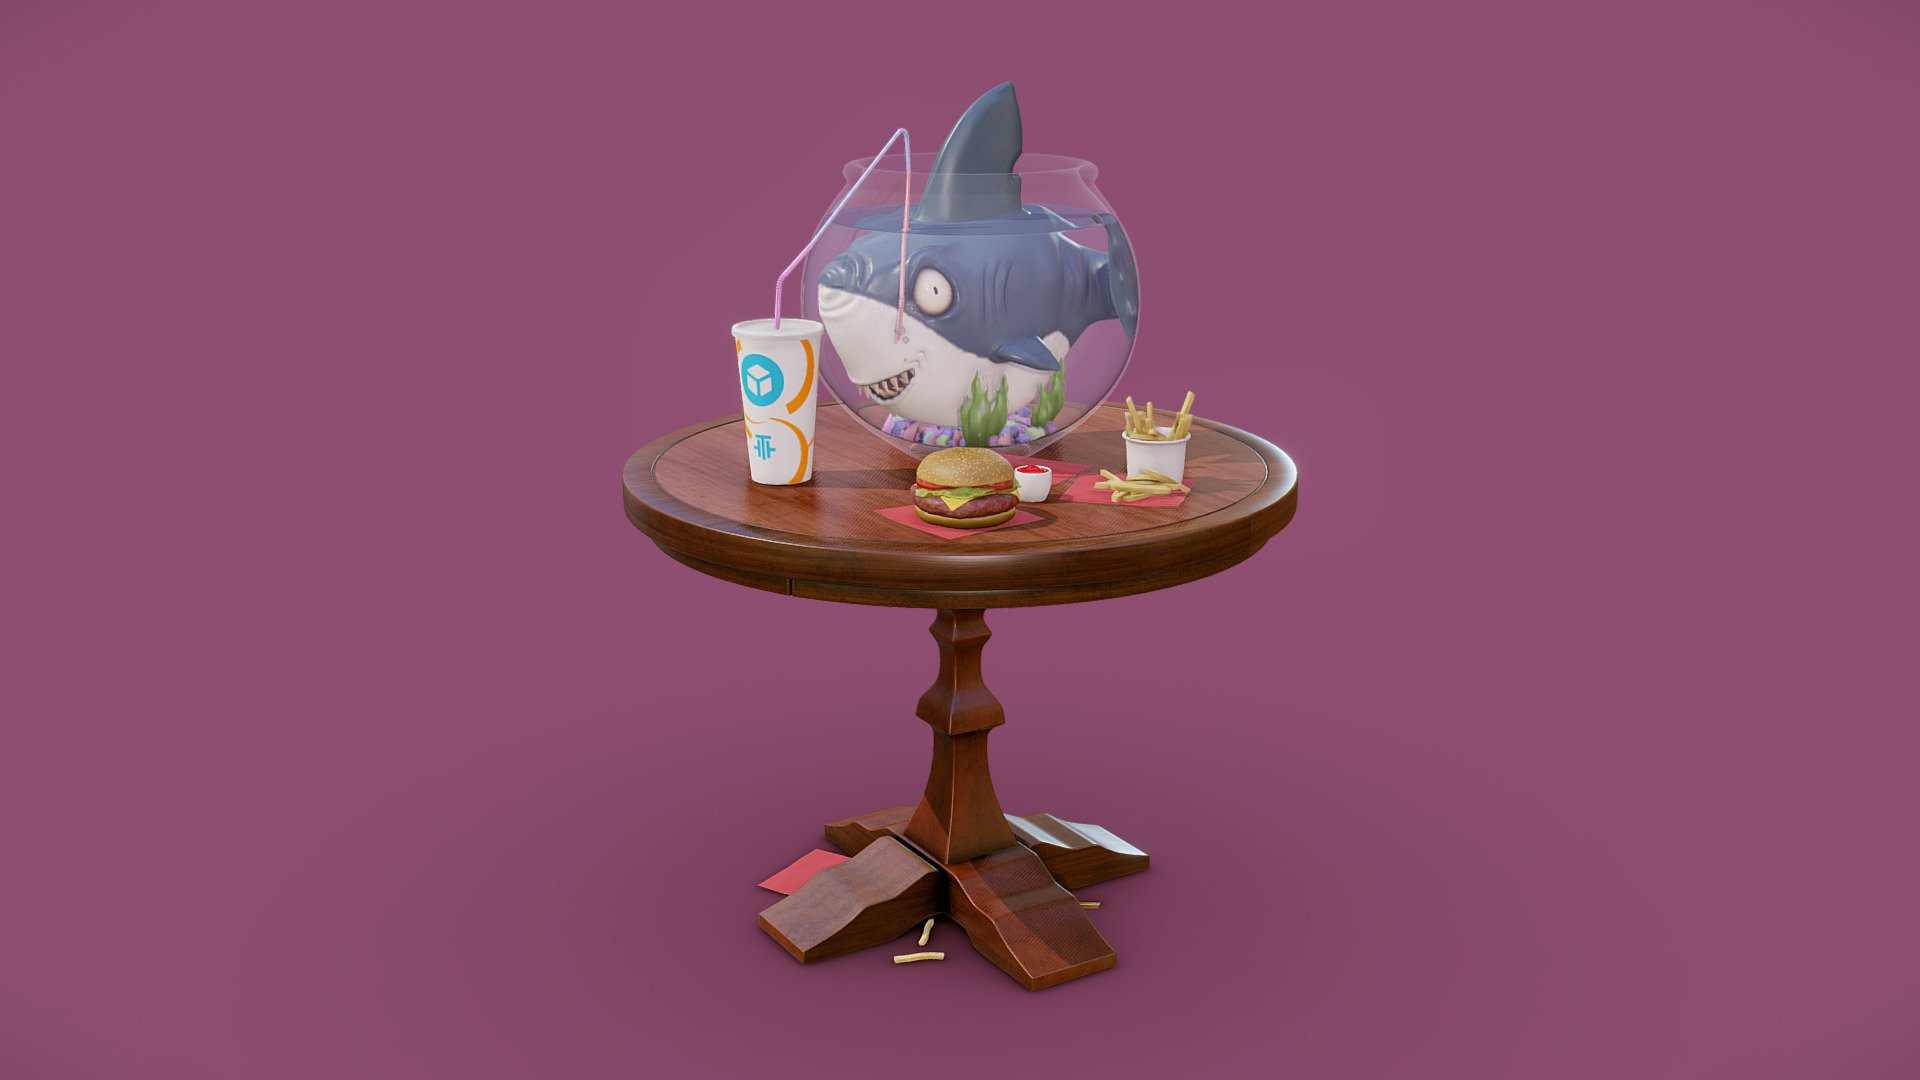 Thanks to MattheyRiegert for sharing his round table model!

And special thanks to Christopher Joly  for his great Inktober concept art - Misfit








 

Other reference images:

 - Shark in a bowl - Download Free 3D model by Warkarma 3d model